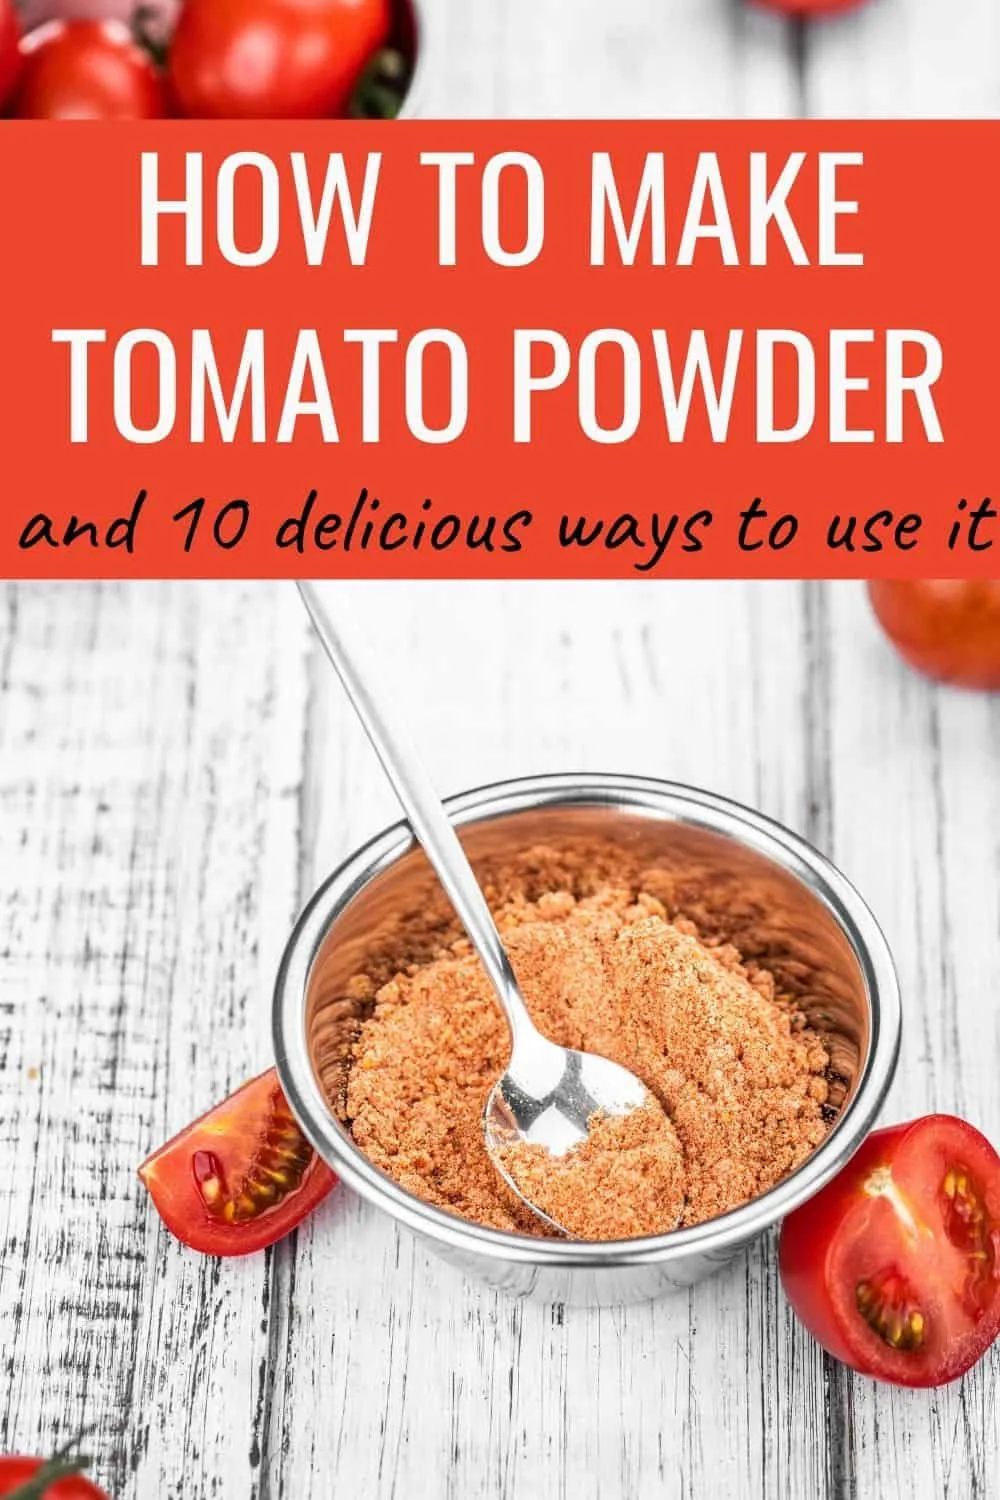 How to make tomato powder and 10 delicious ways to use it